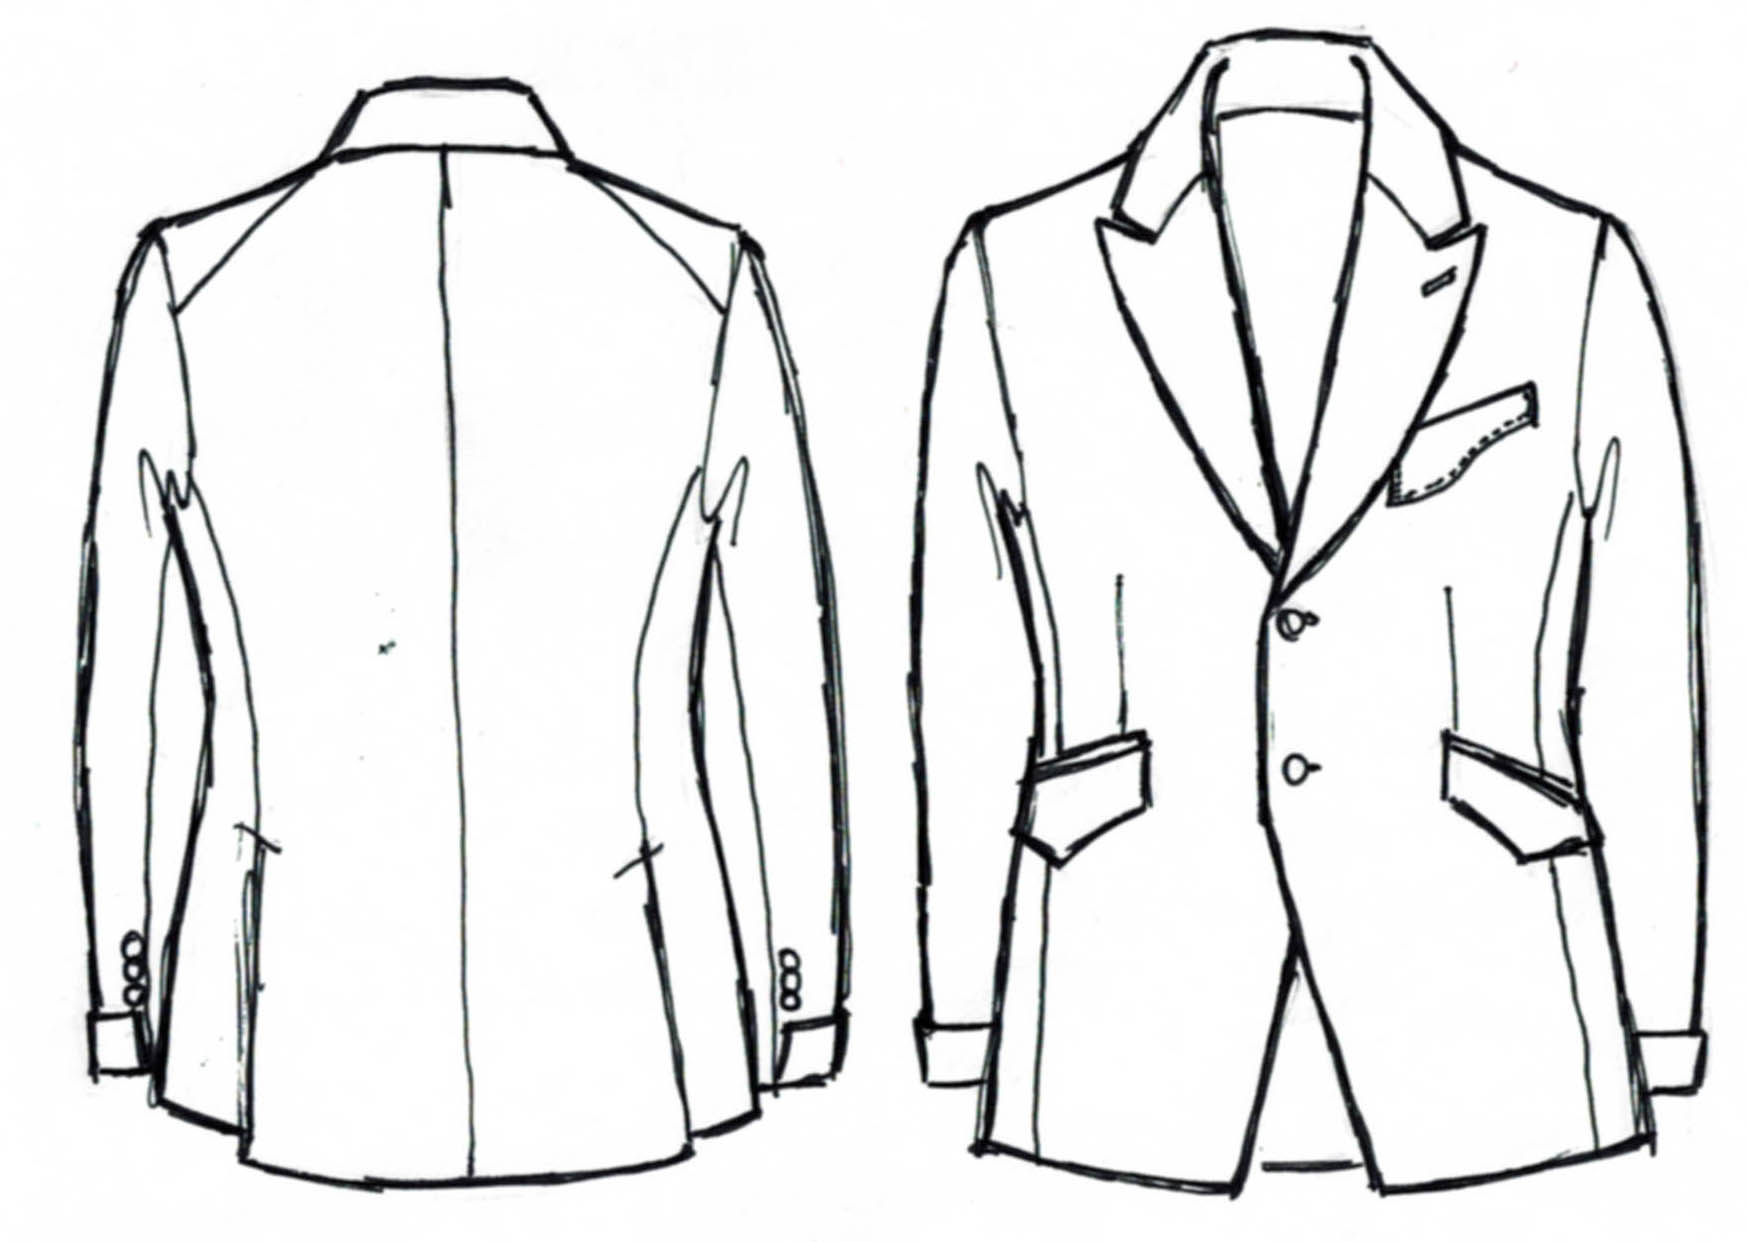 A.J.’s Complete Suit Guide » Denver Bespoke: Custom Tailored Suits